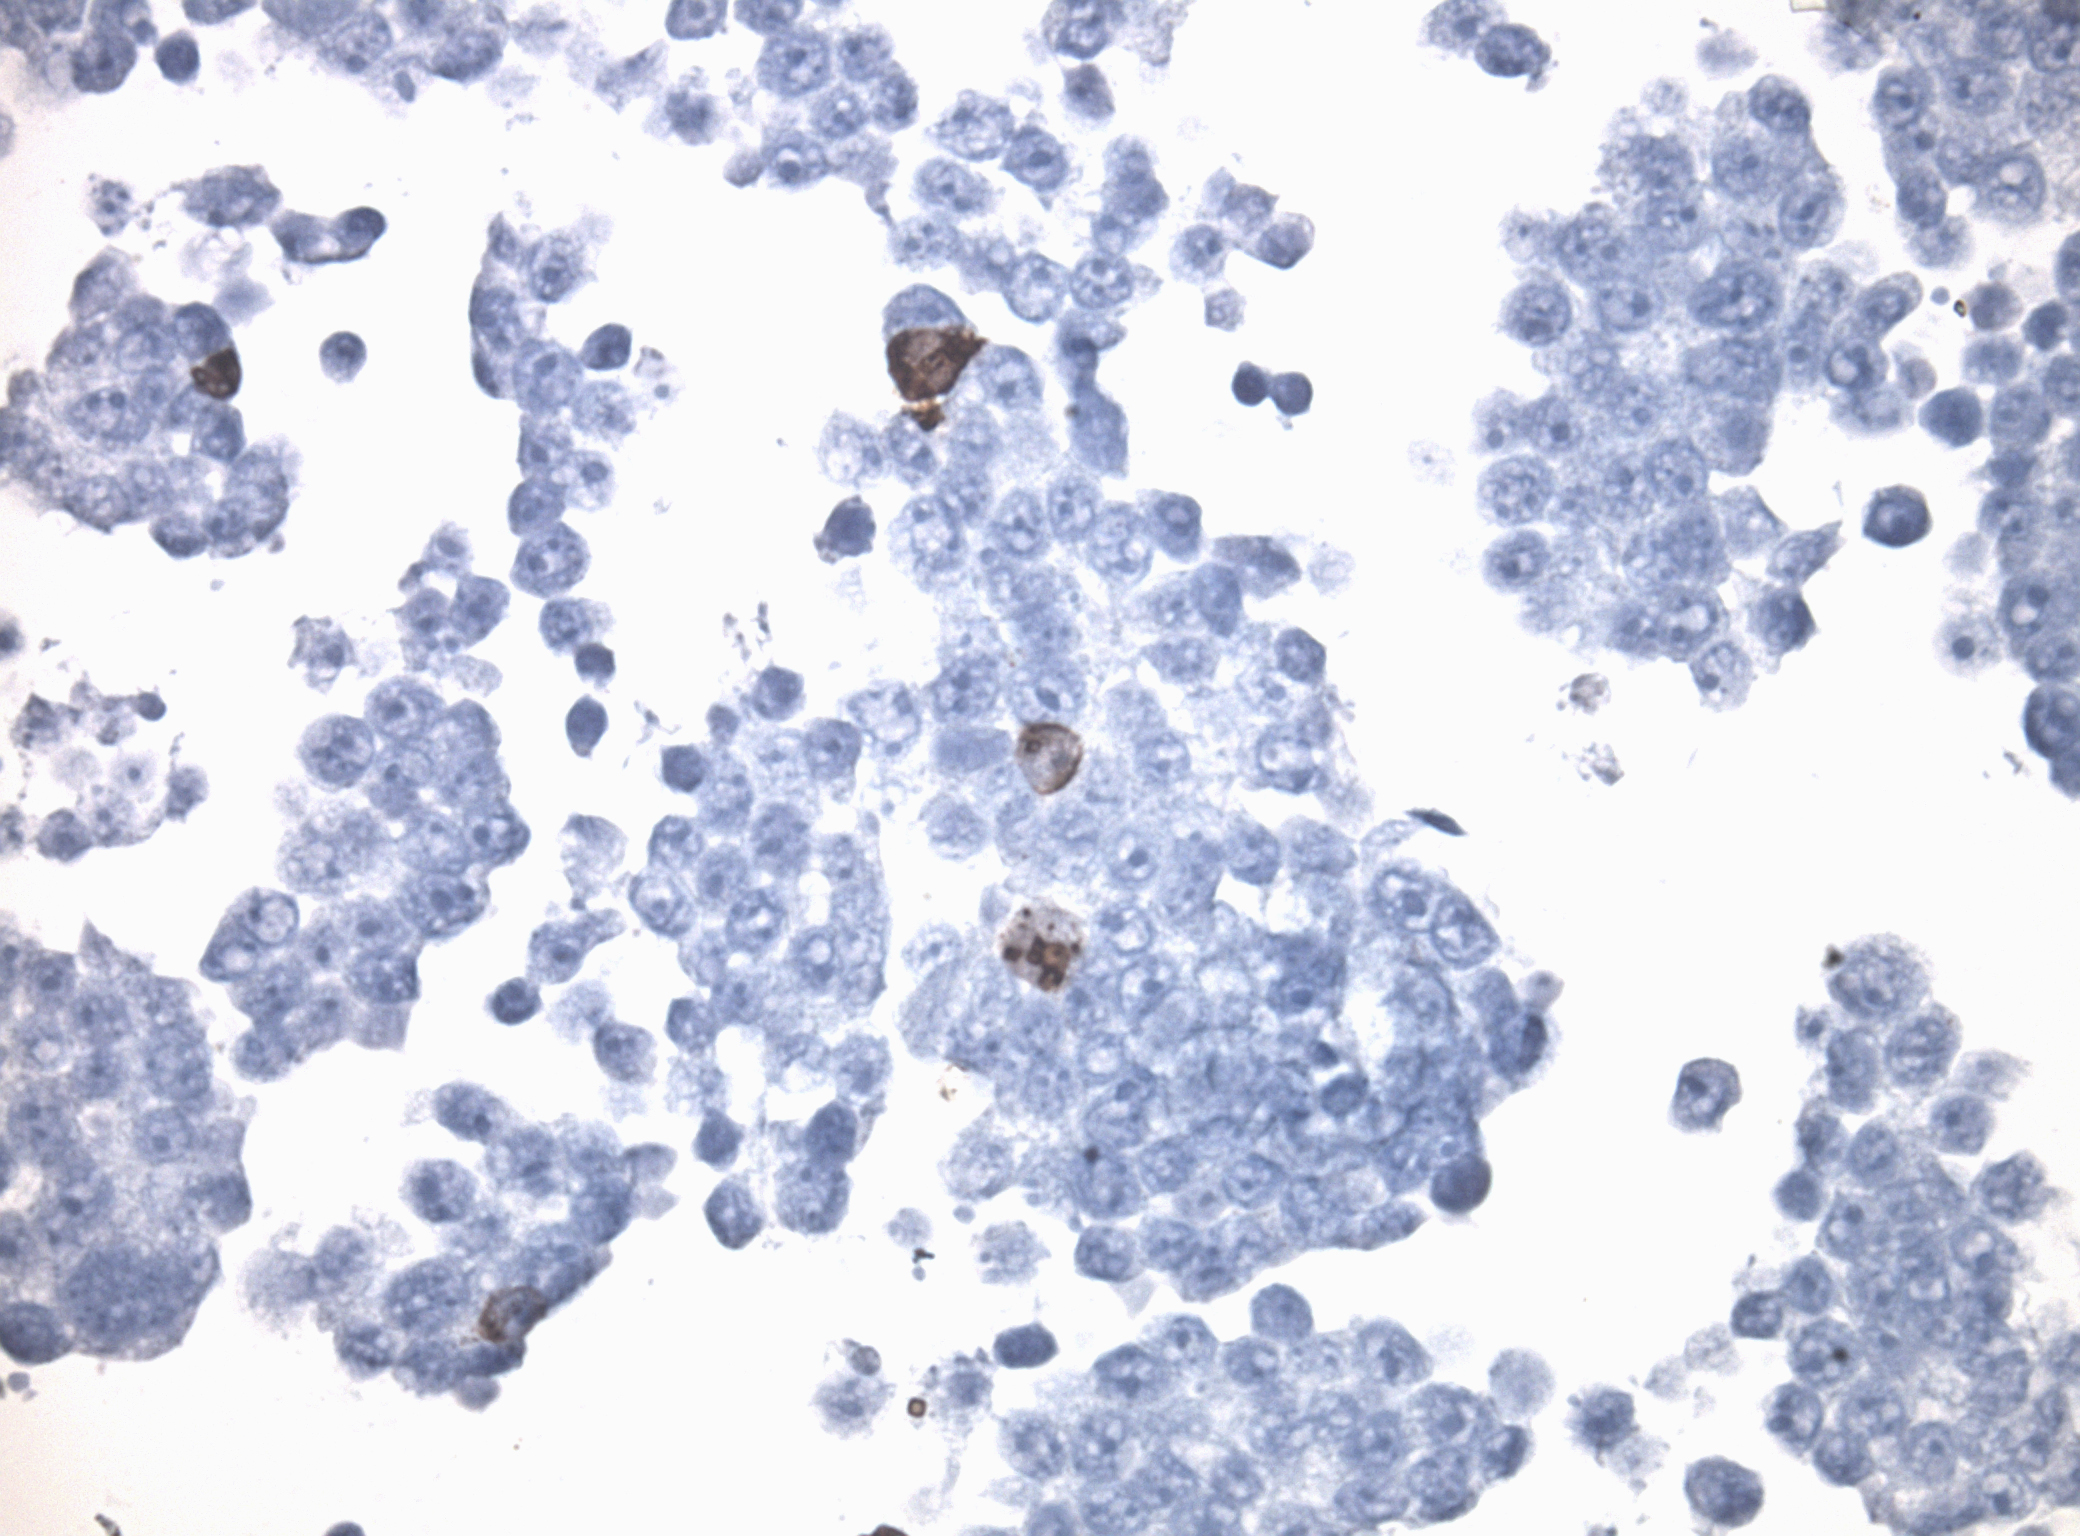 Immunohistology staining on WWC3 overexpressed cytosection TS415823P5 with mouse anti DDK clone OTI11C3 C/N TA180144 at 1:400 dilution 4C O/N. Antibody staining was achieved with HIER Citrate pH6 , Polink1 with DAB chromogen detection kit (D11-18). Positive stain shown with the brown chromogen present. HEK293T cells were transfected with cDNA clone RC215823, 5 micron sections, 40x magnification